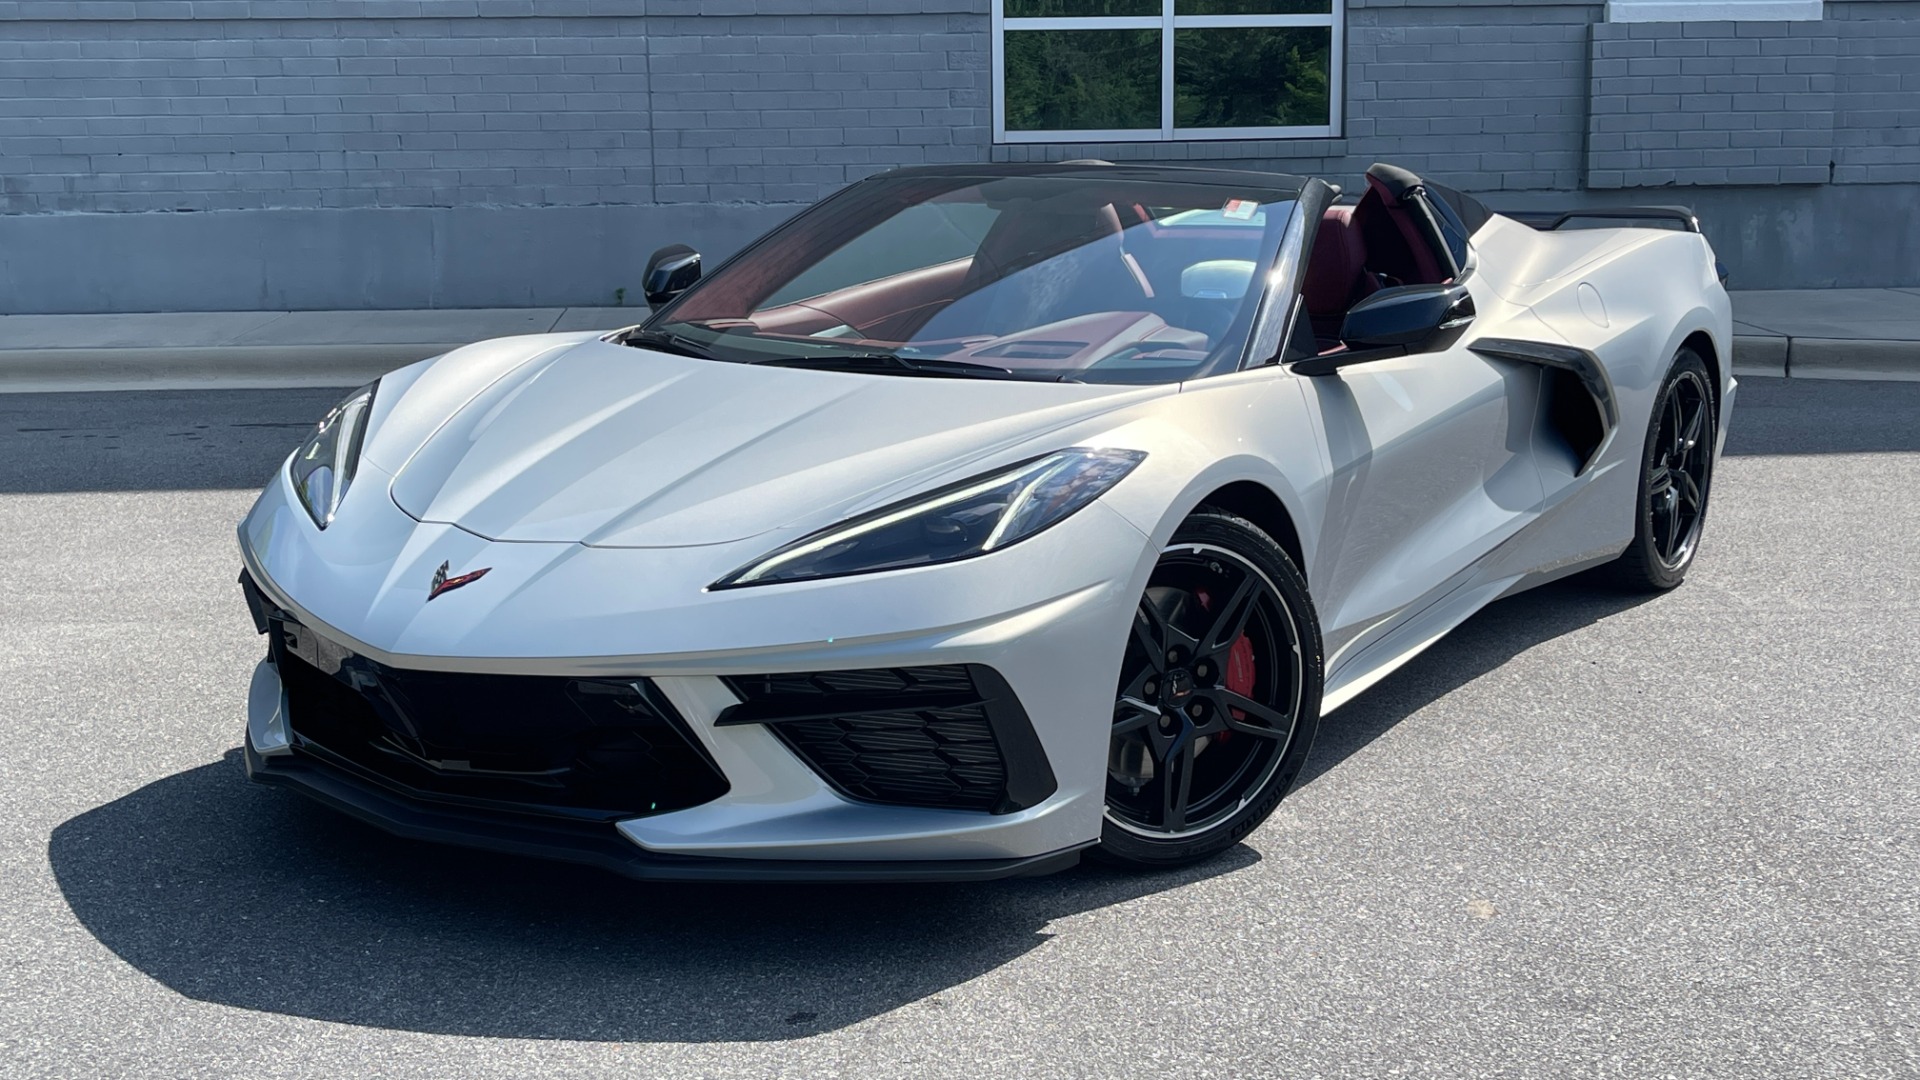 Used 2021 Chevrolet Corvette 3LT CONVERTIBLE MORELLO / Z51 / FRONT LIFT for sale $100,900 at Formula Imports in Charlotte NC 28227 2